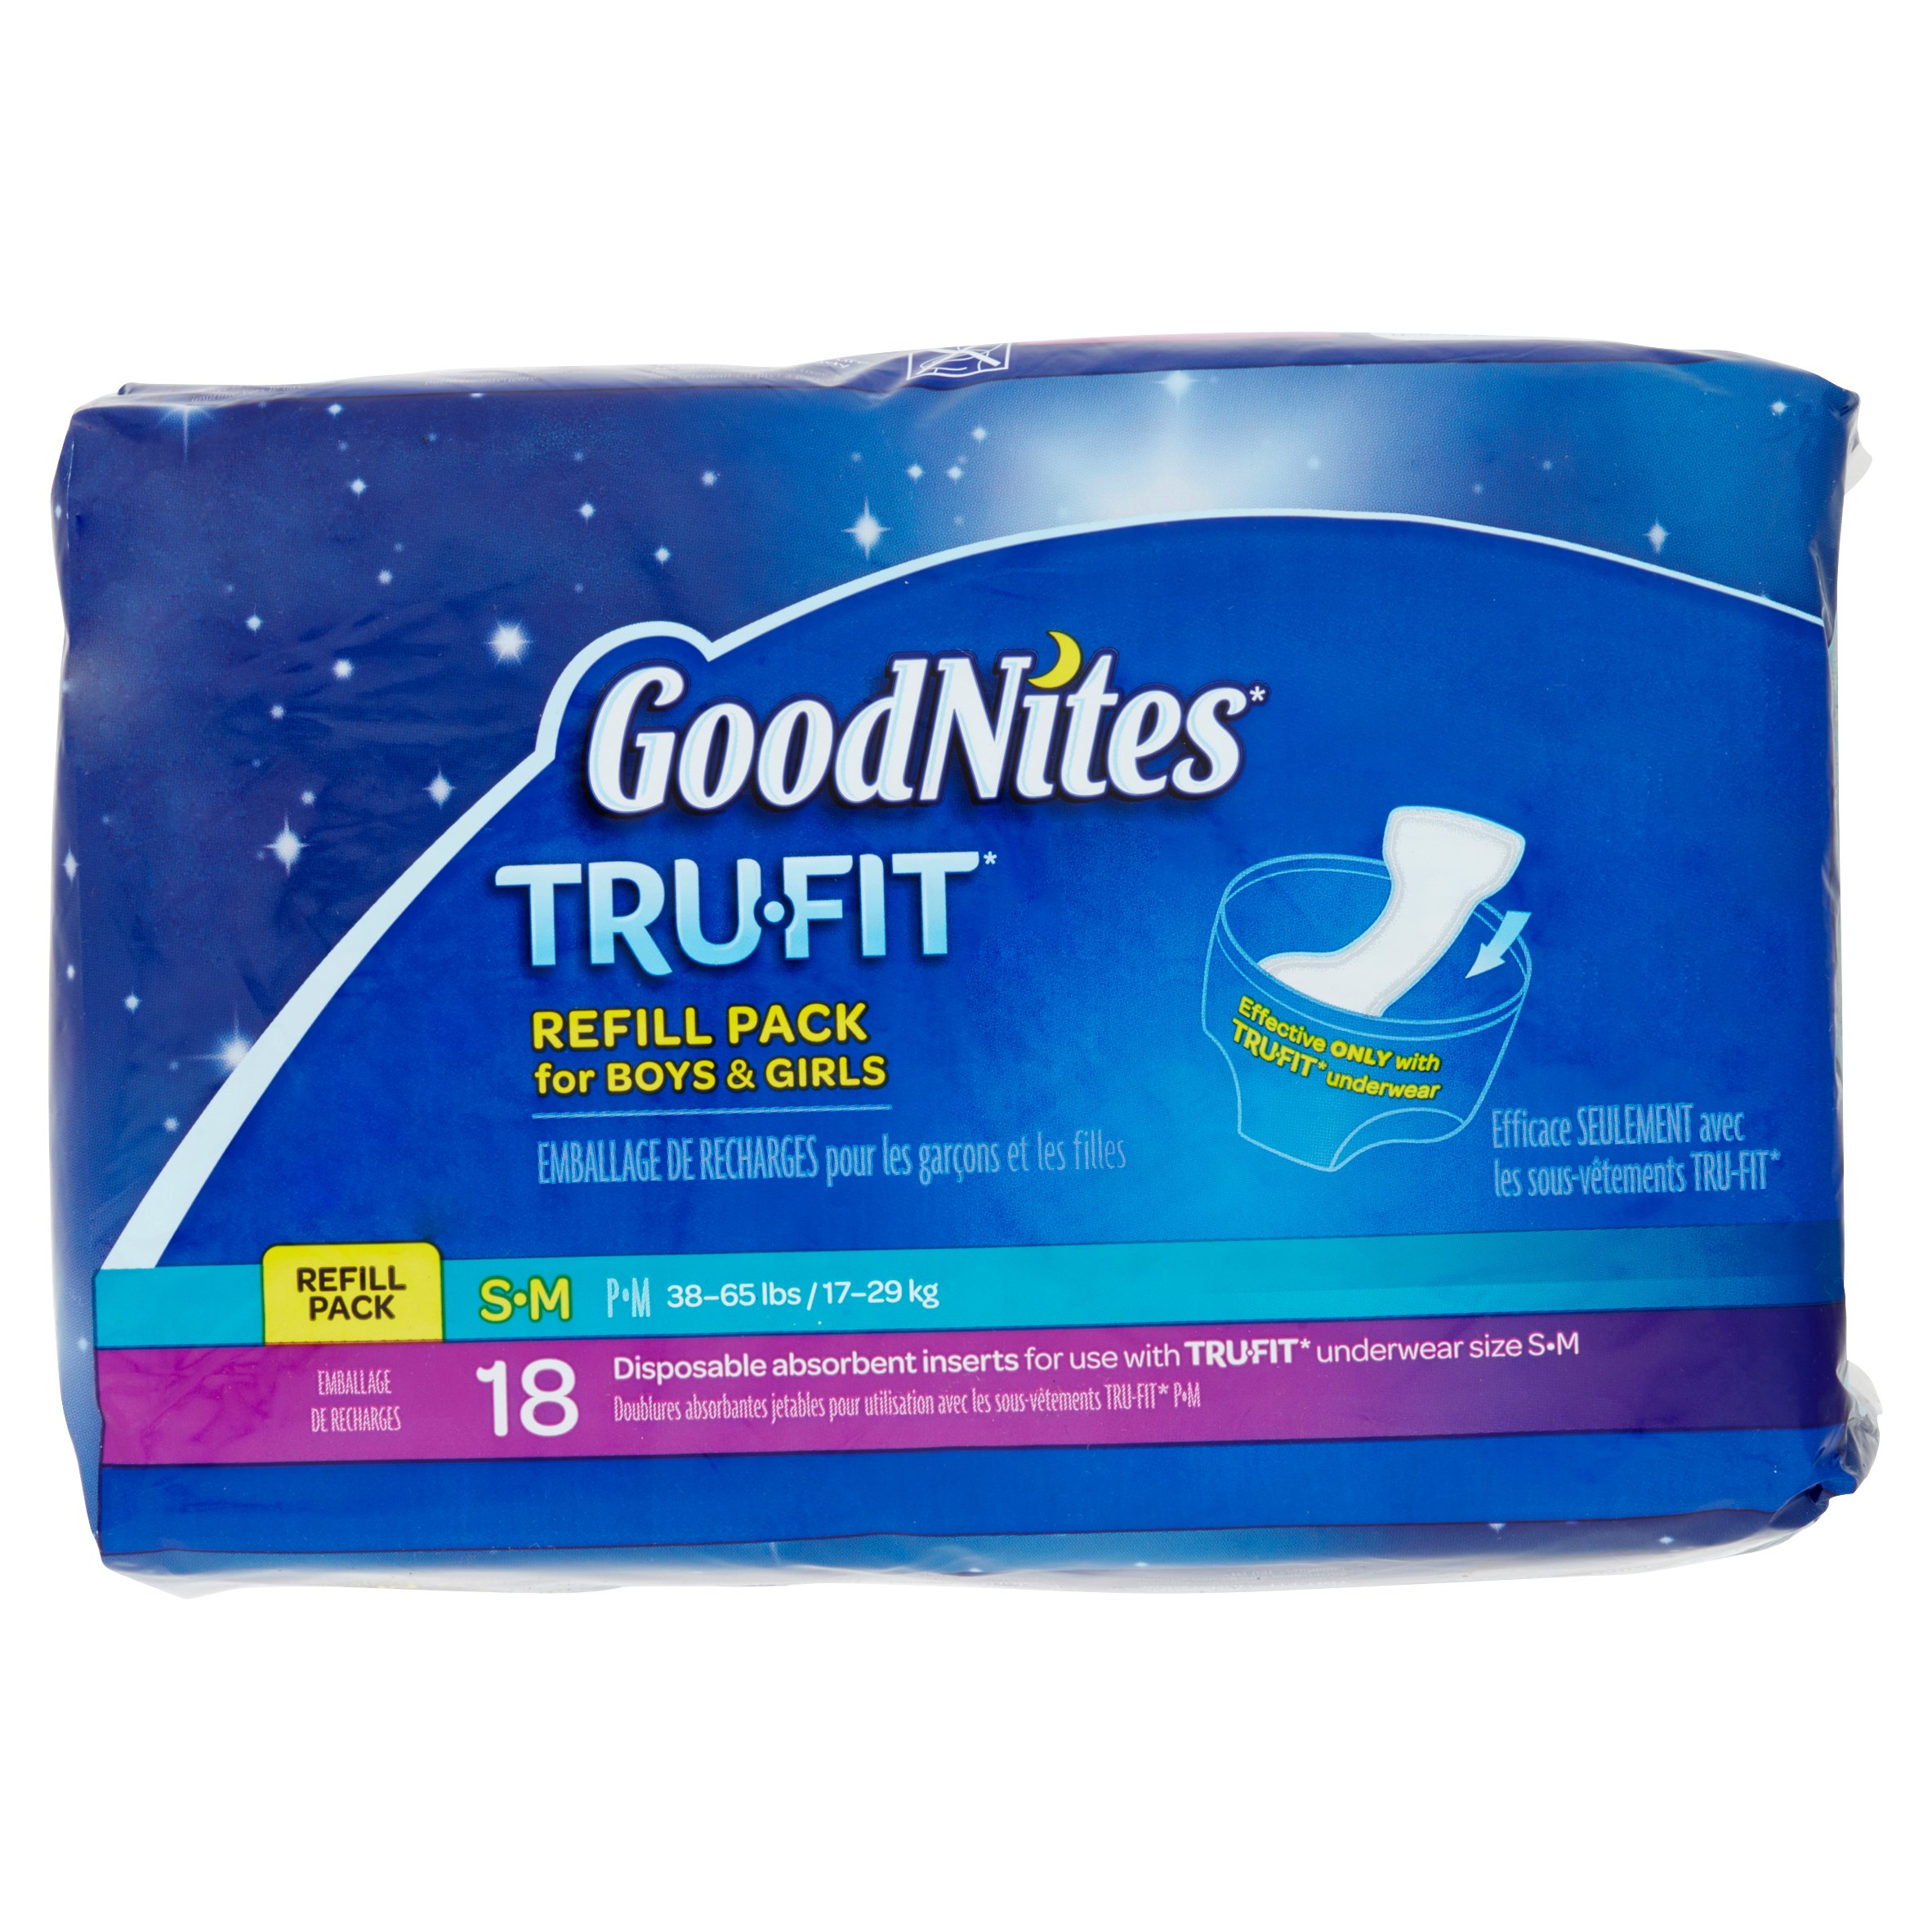 GoodNites TruFit Disposable Absorbent Inserts for Boys & Girls Refill Pack - image 5 of 8